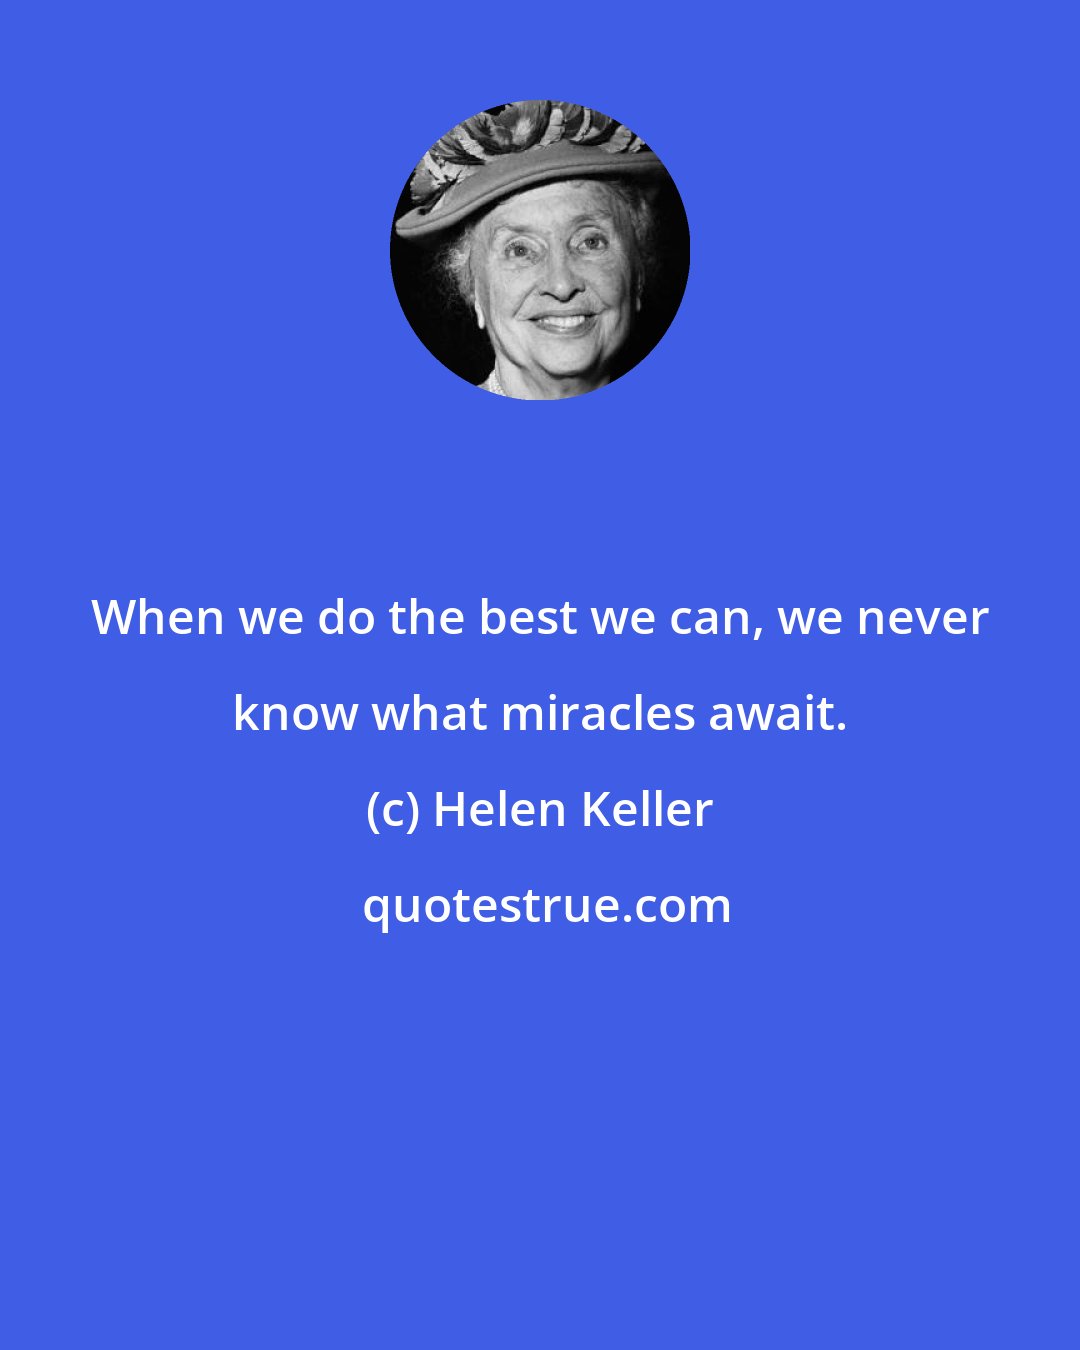 Helen Keller: When we do the best we can, we never know what miracles await.